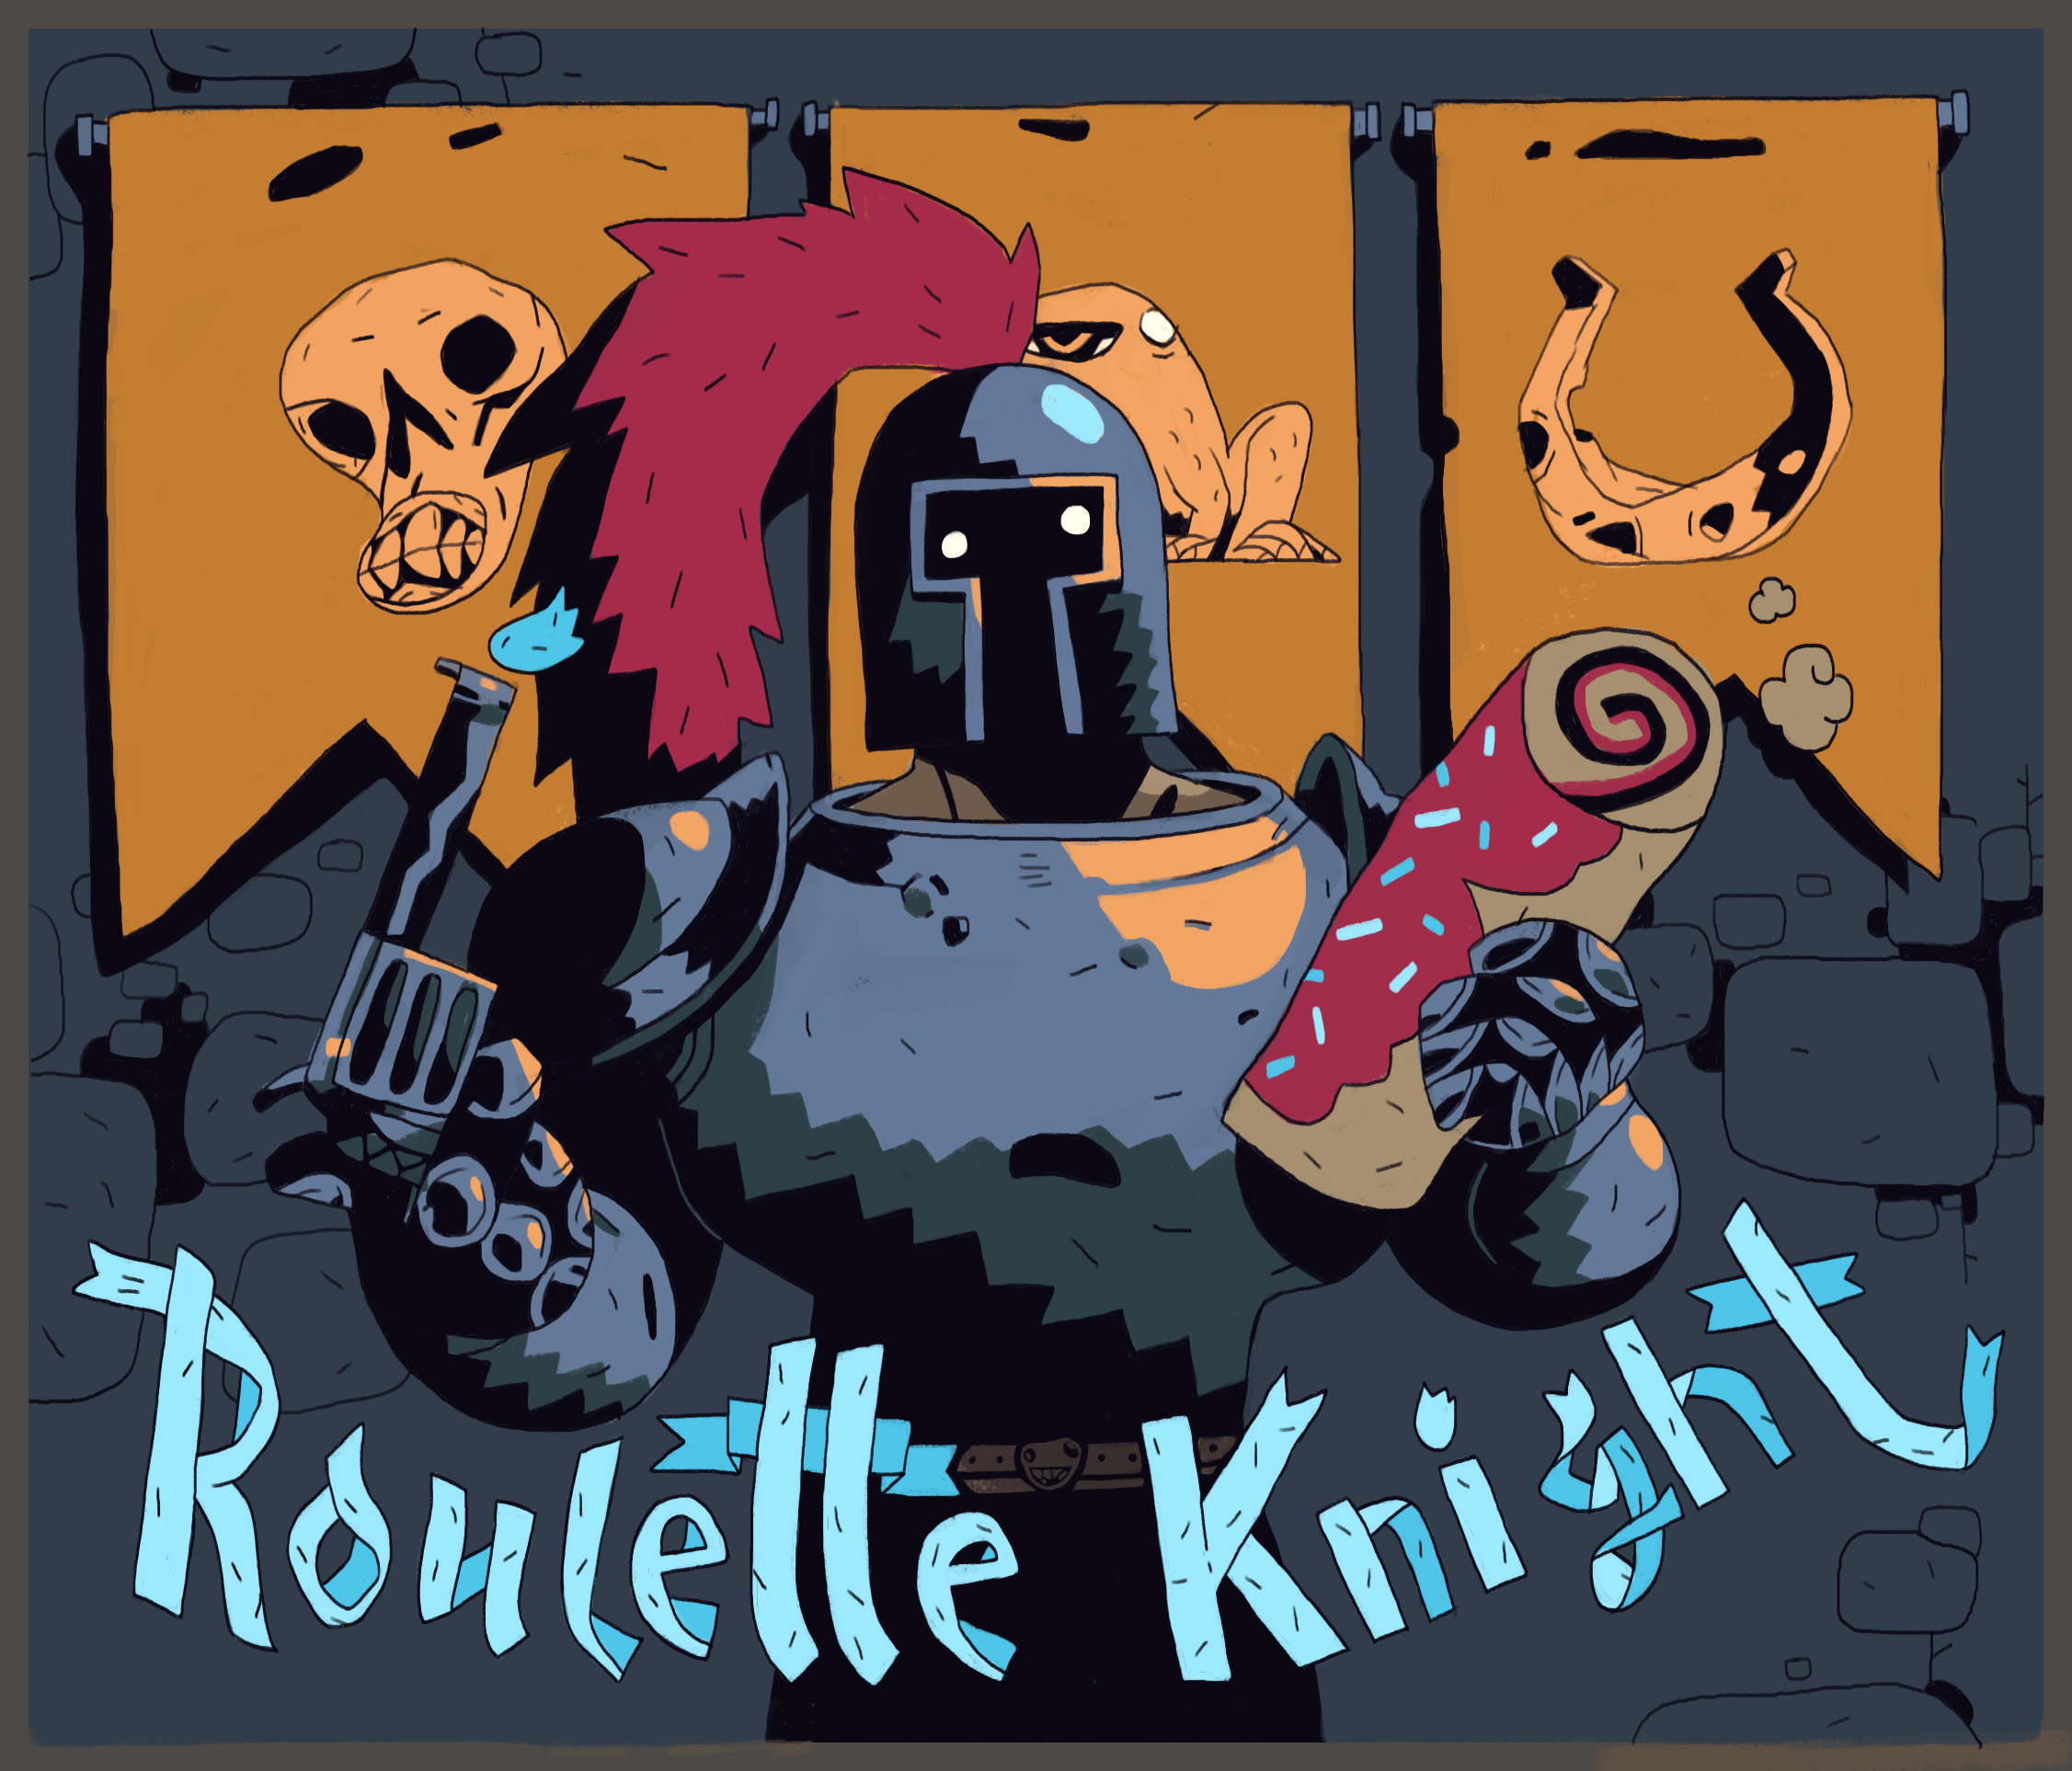 Roulette knight